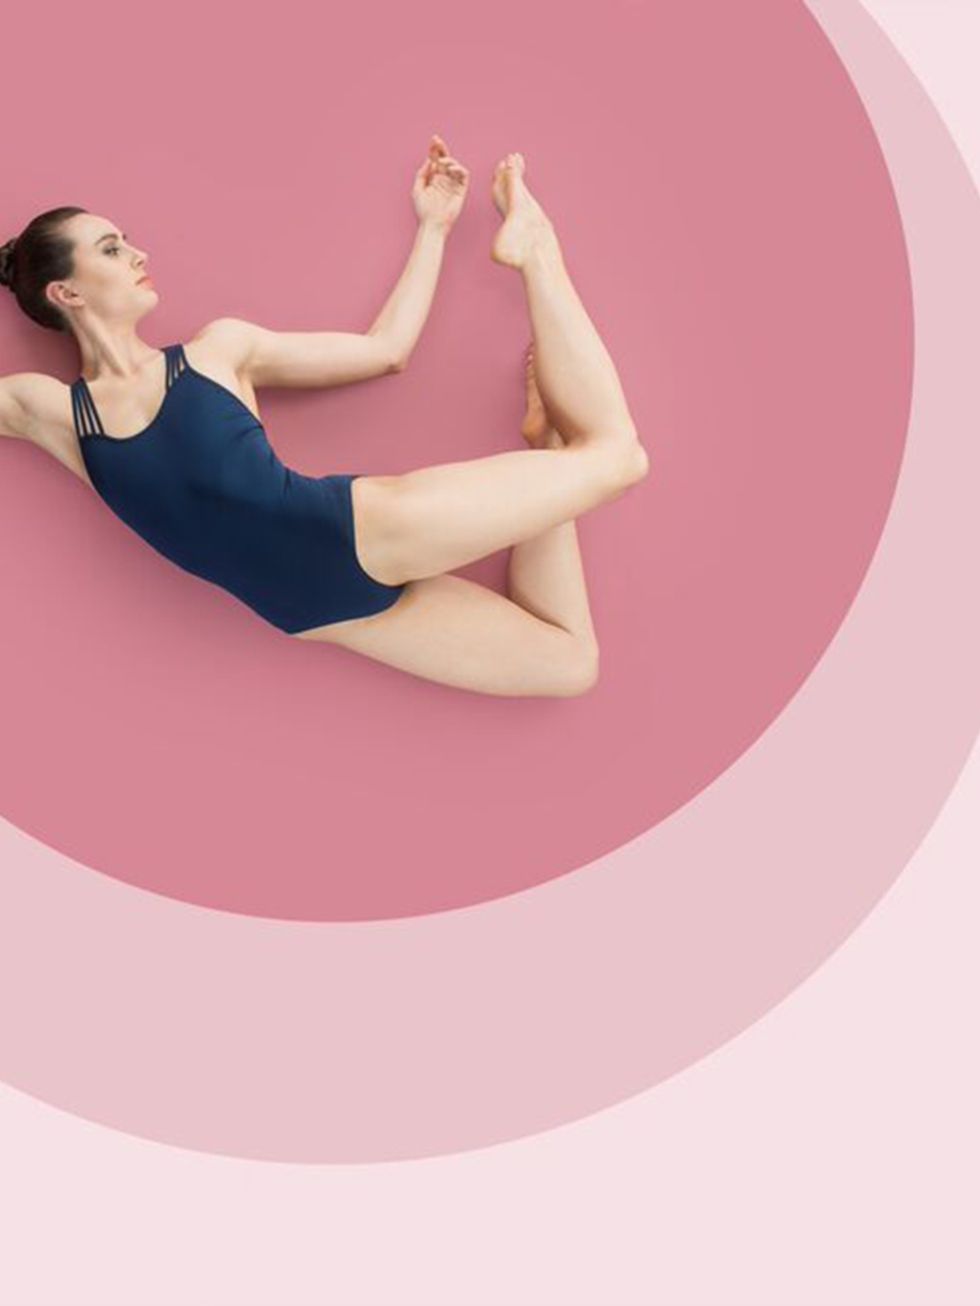 <p><strong>PEPPER & MAYNE</strong></p>

<p>Want to get into ballet barre? You could do worse than kit yourself out at Pepper & Mayne. Launched in 2013, elegant activewear has always been their speciality.</p>

<p>Available at <a href="https://www.wolfandb